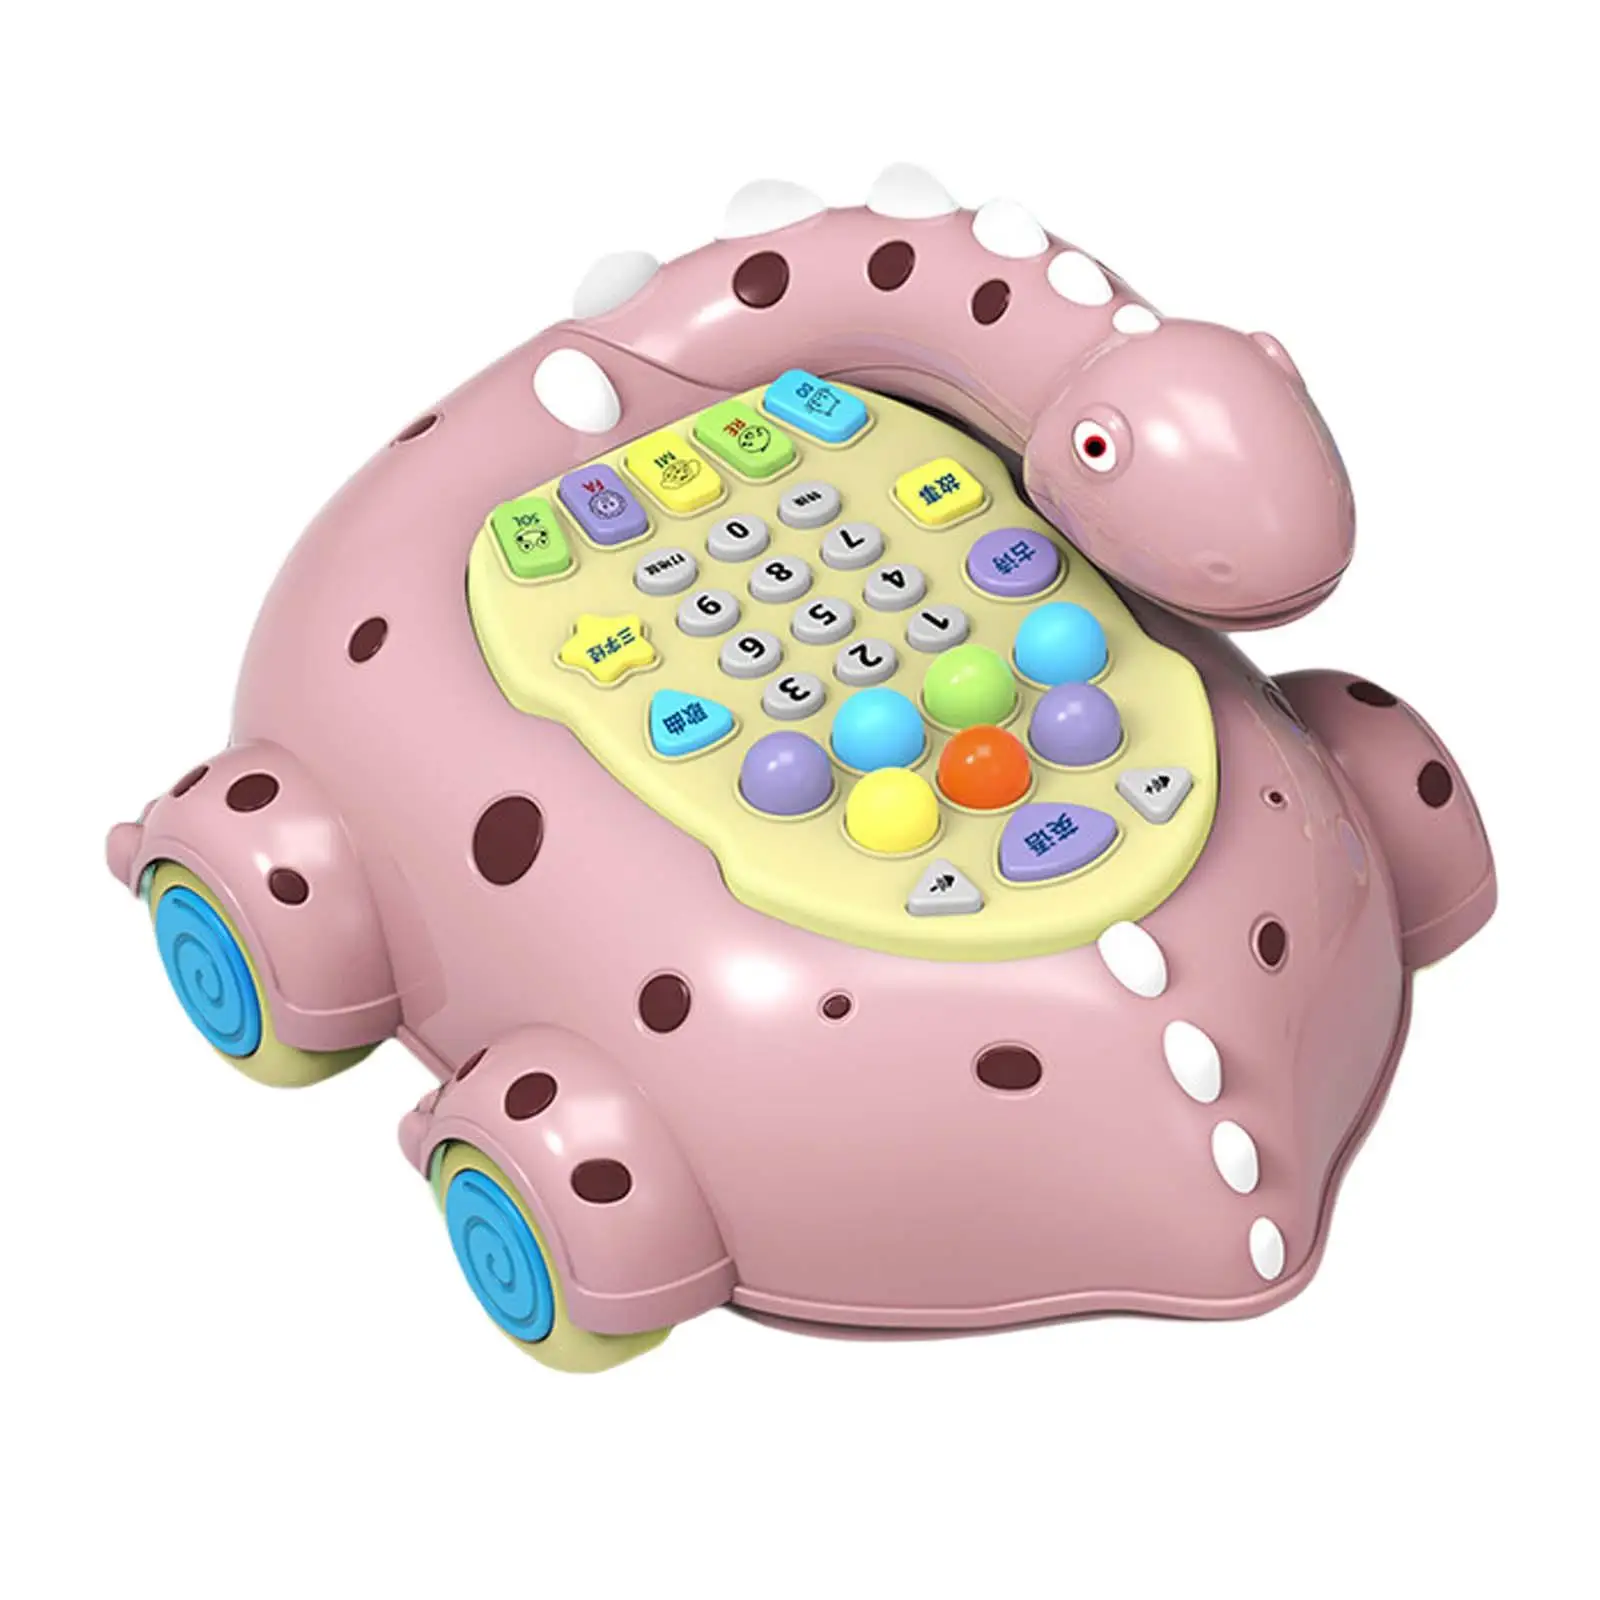 Baby Telephone Toy Movable sound for Education Development Interaction